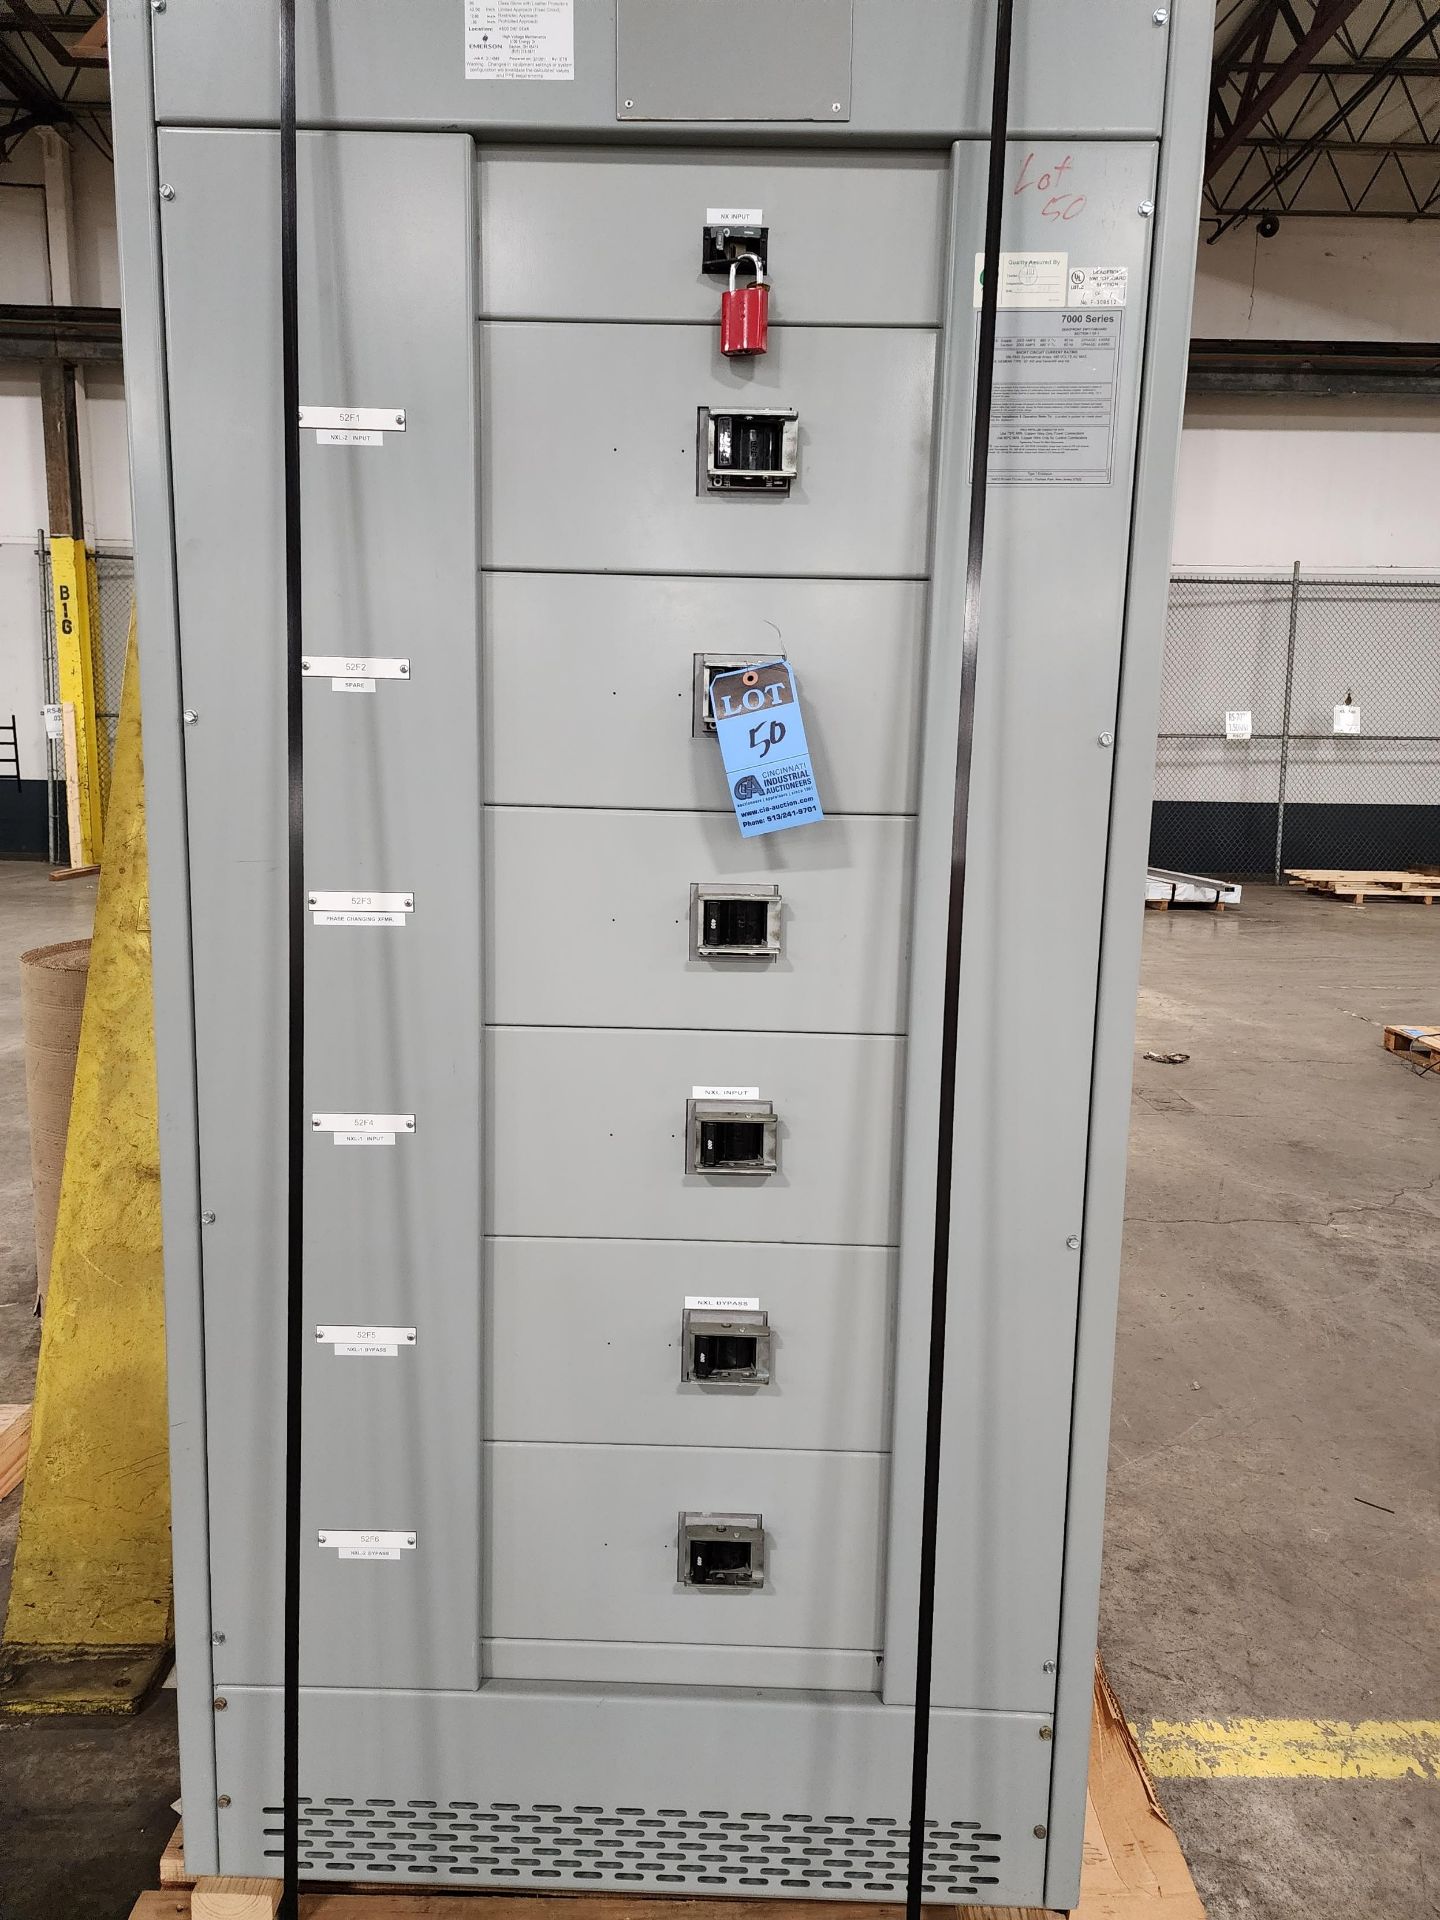 2,000 AMP EMERSON MODEL ASCO 7000 POWER TRANSFORMER SWITCH; (1) MASTER SWITCH & (6) 400 AMP BREAKERS - Image 4 of 5